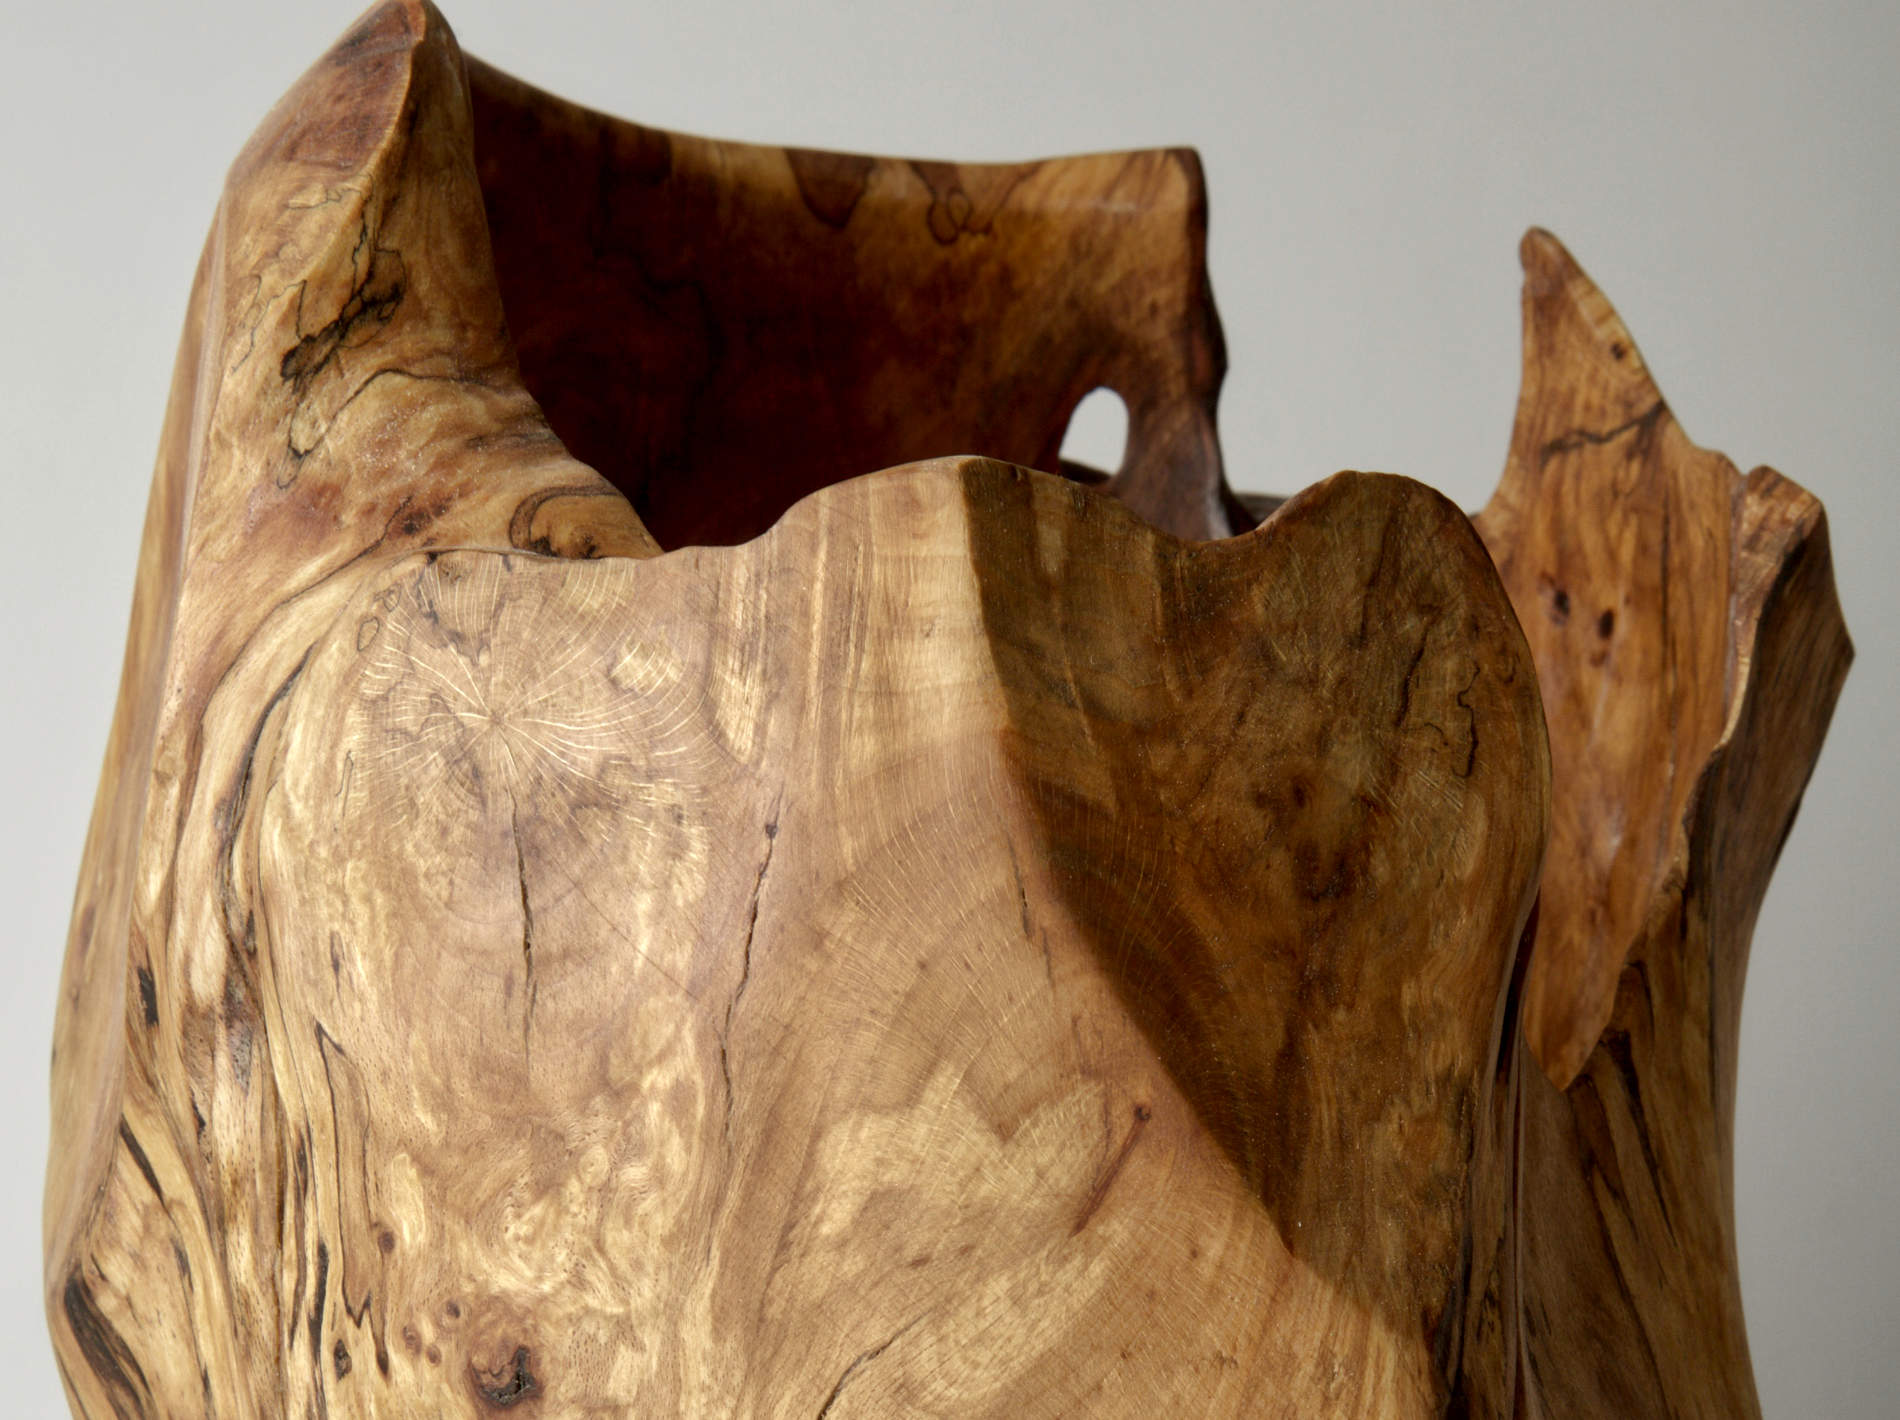 Orlando Donic Gualtieri - Sculpted Vessel in Spalted Beech